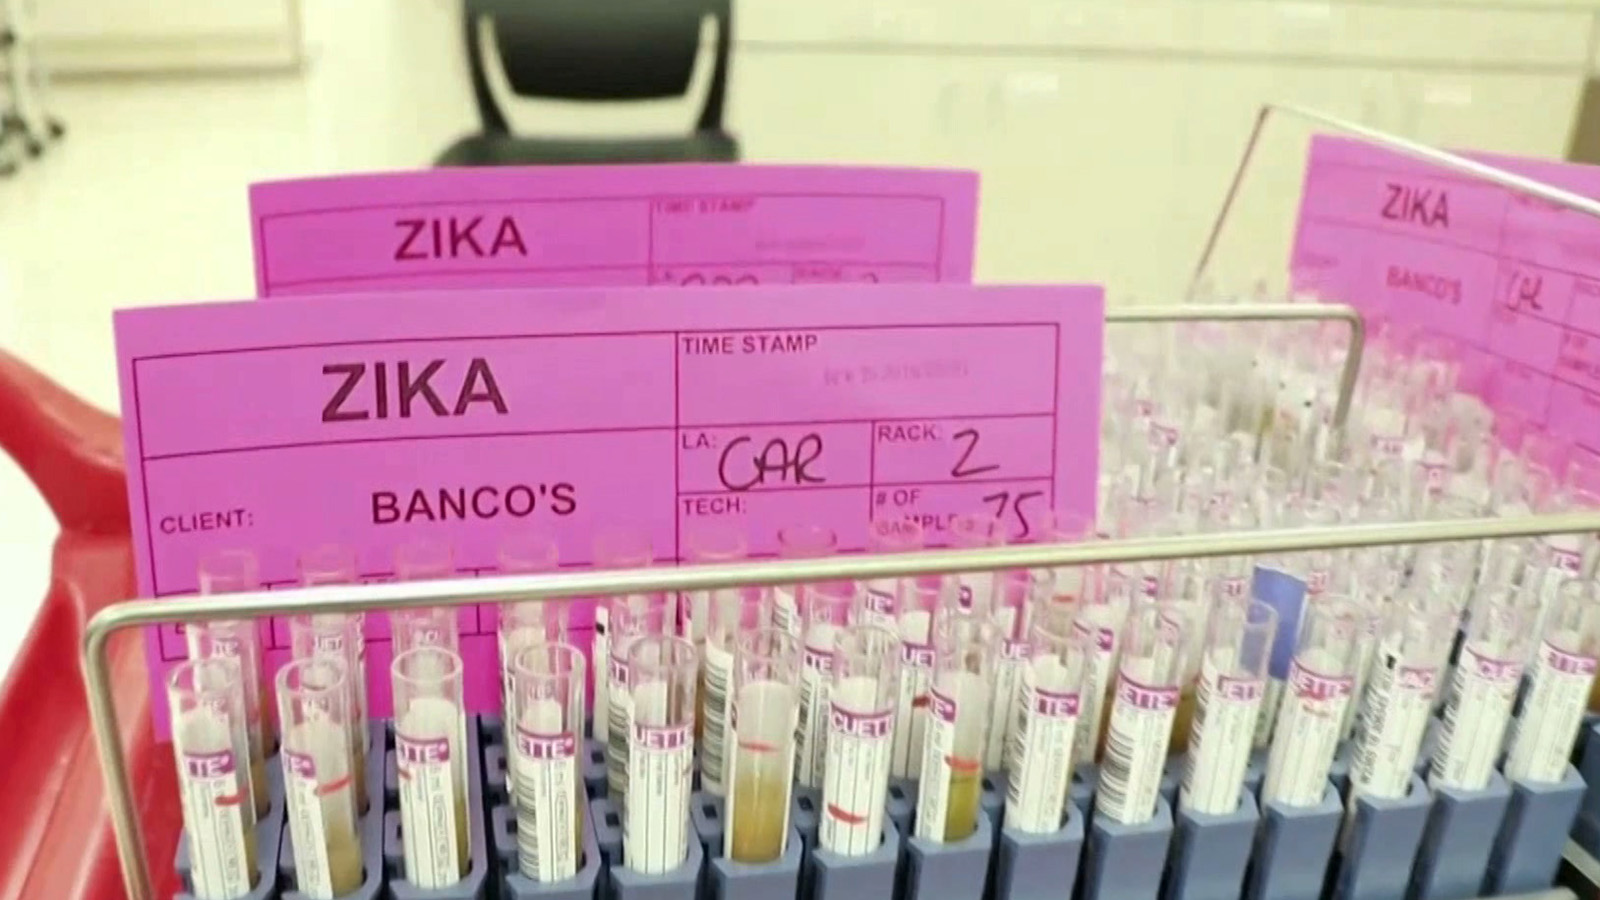 Non-travel related case of Zika found in Florida